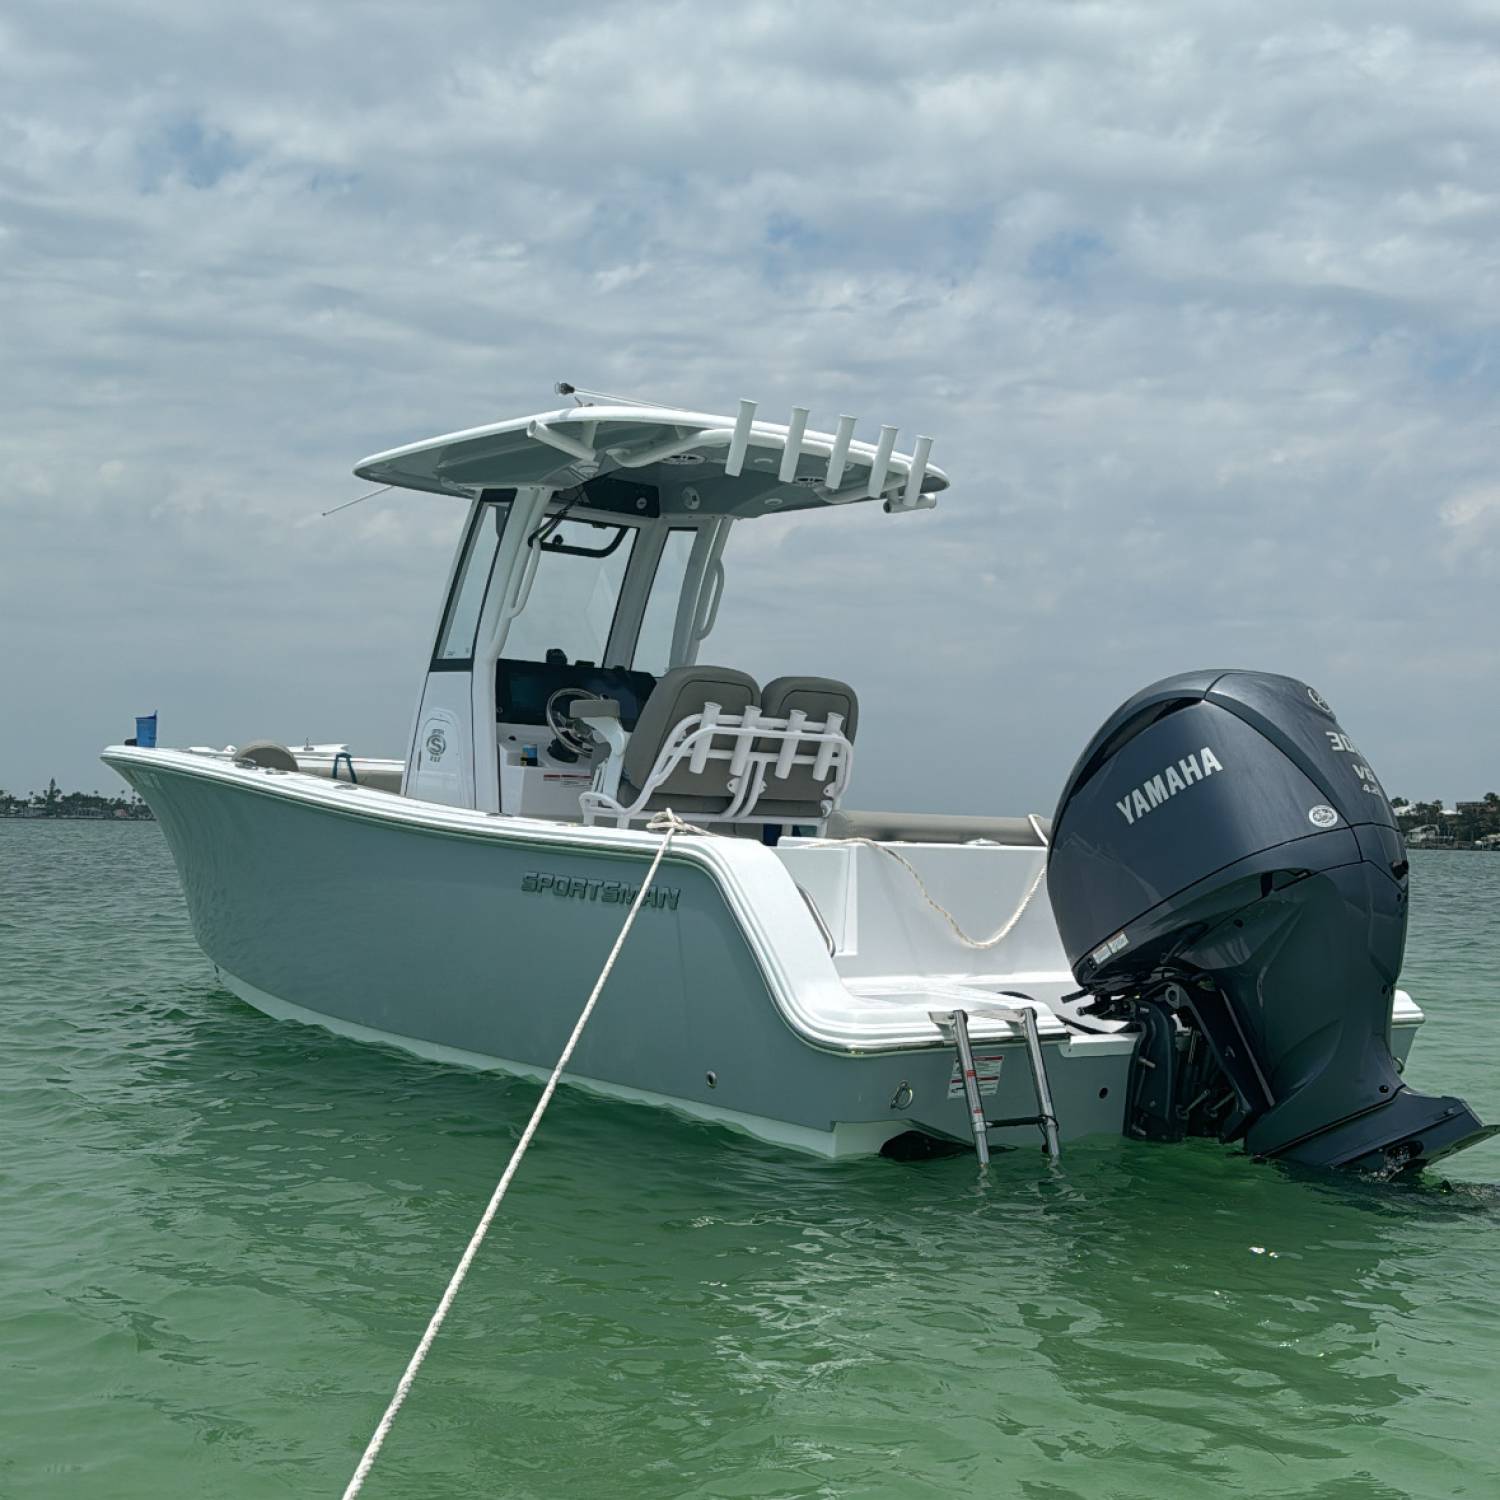 Title: Sunday funday - On board their Sportsman Open 232 Center Console - Location: St Petersburg, FL (shell key). Participating in the Photo Contest #SportsmanMay2024